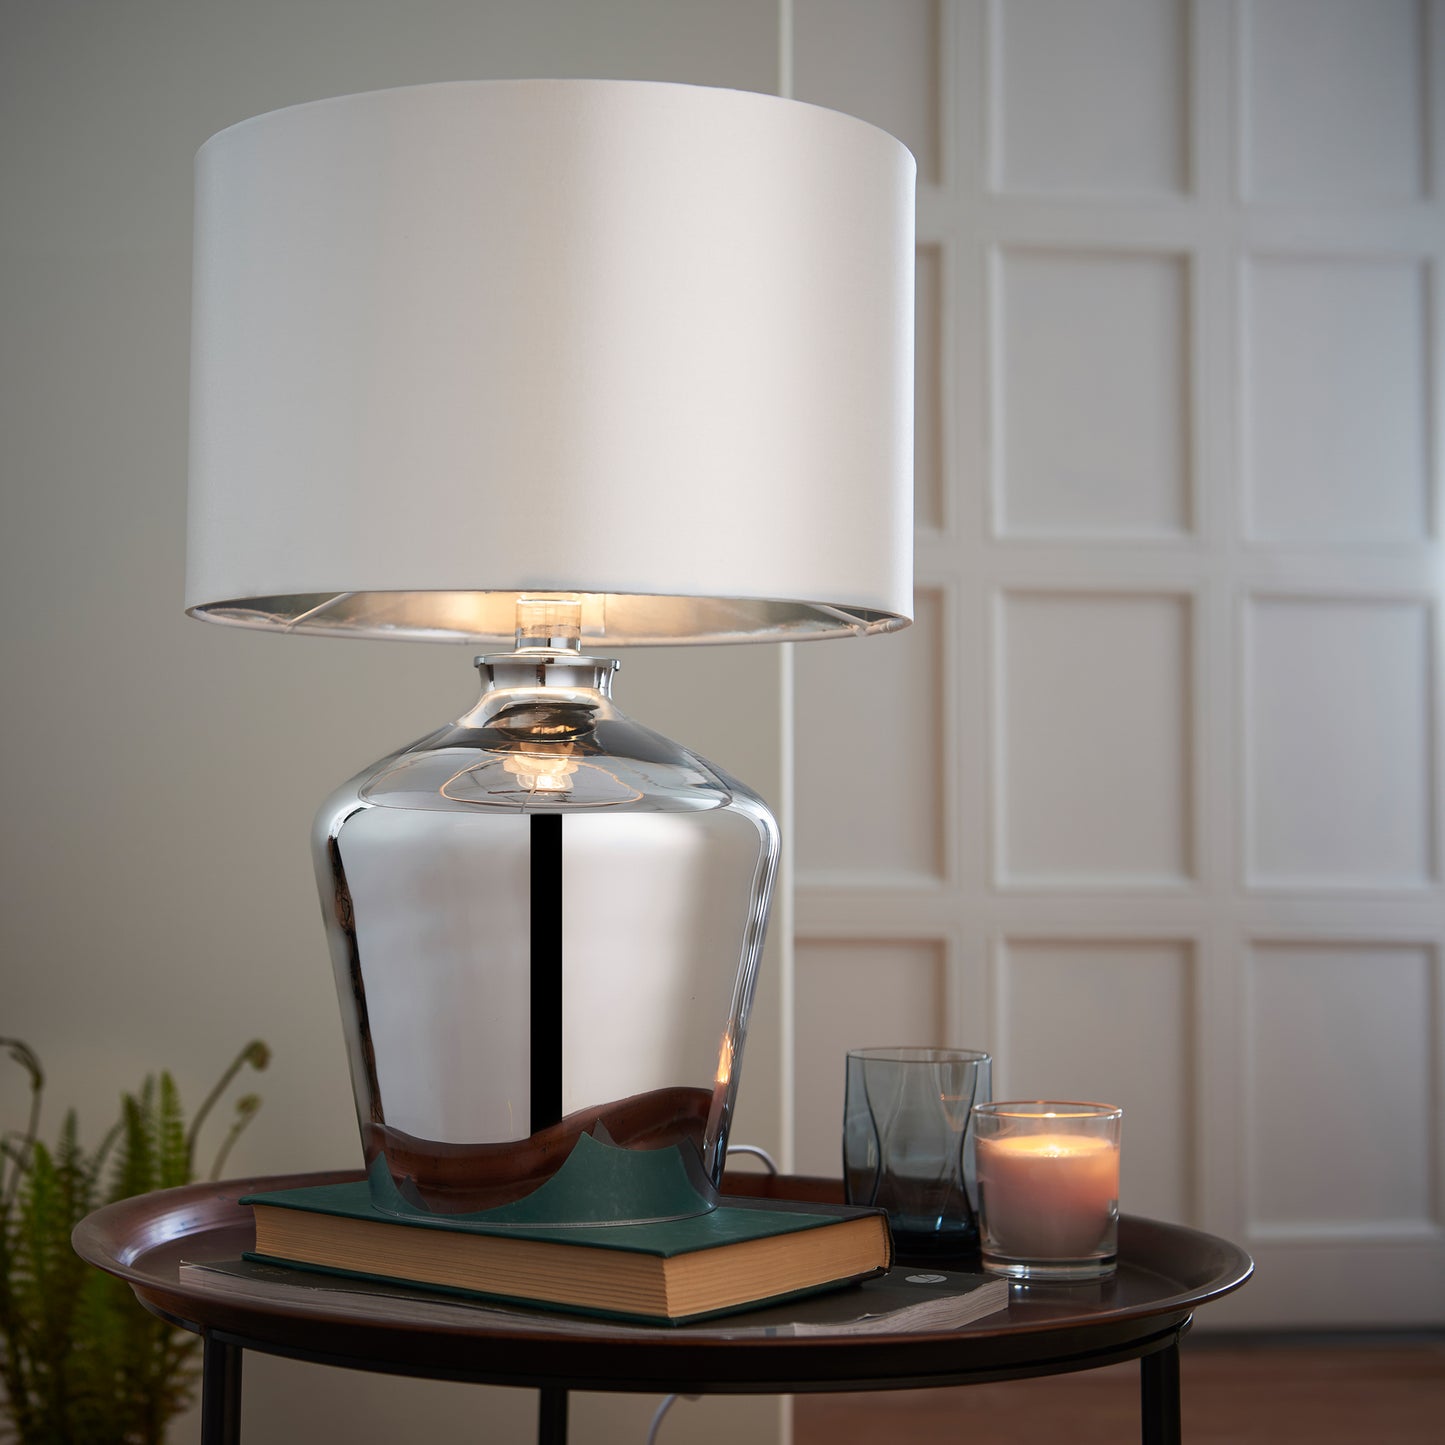 A Waldorf Table Lamp by Kikiathome.co.uk, enhancing interior decor on a table next to a book.